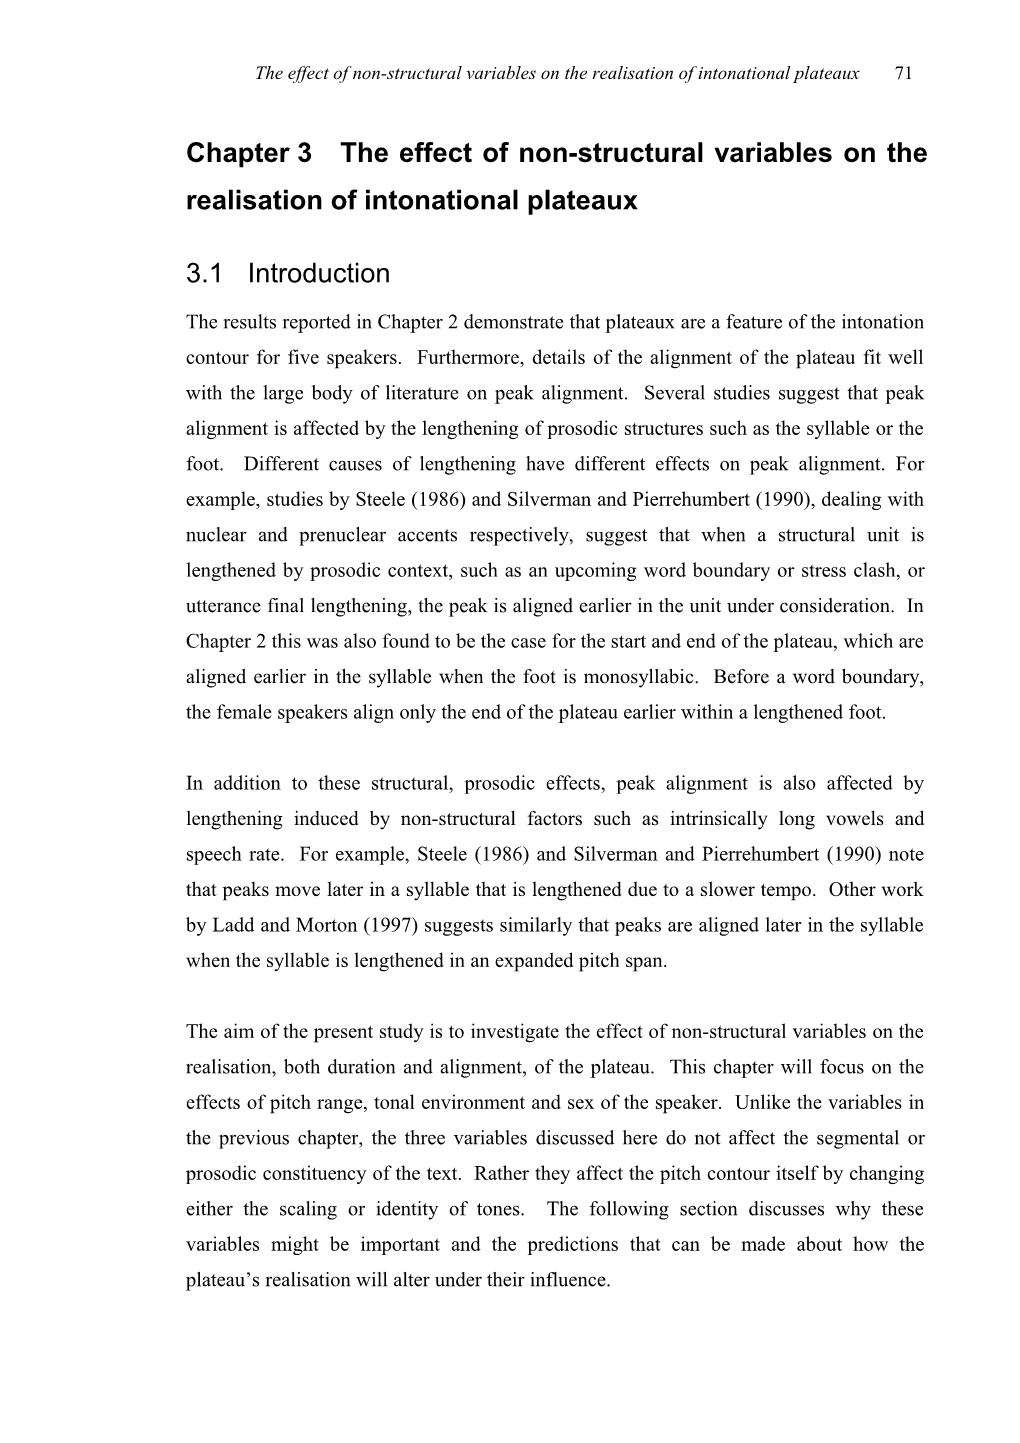 Chapter 3The Effect of Non-Structural Variables on the Realisation of Intonational Plateaux